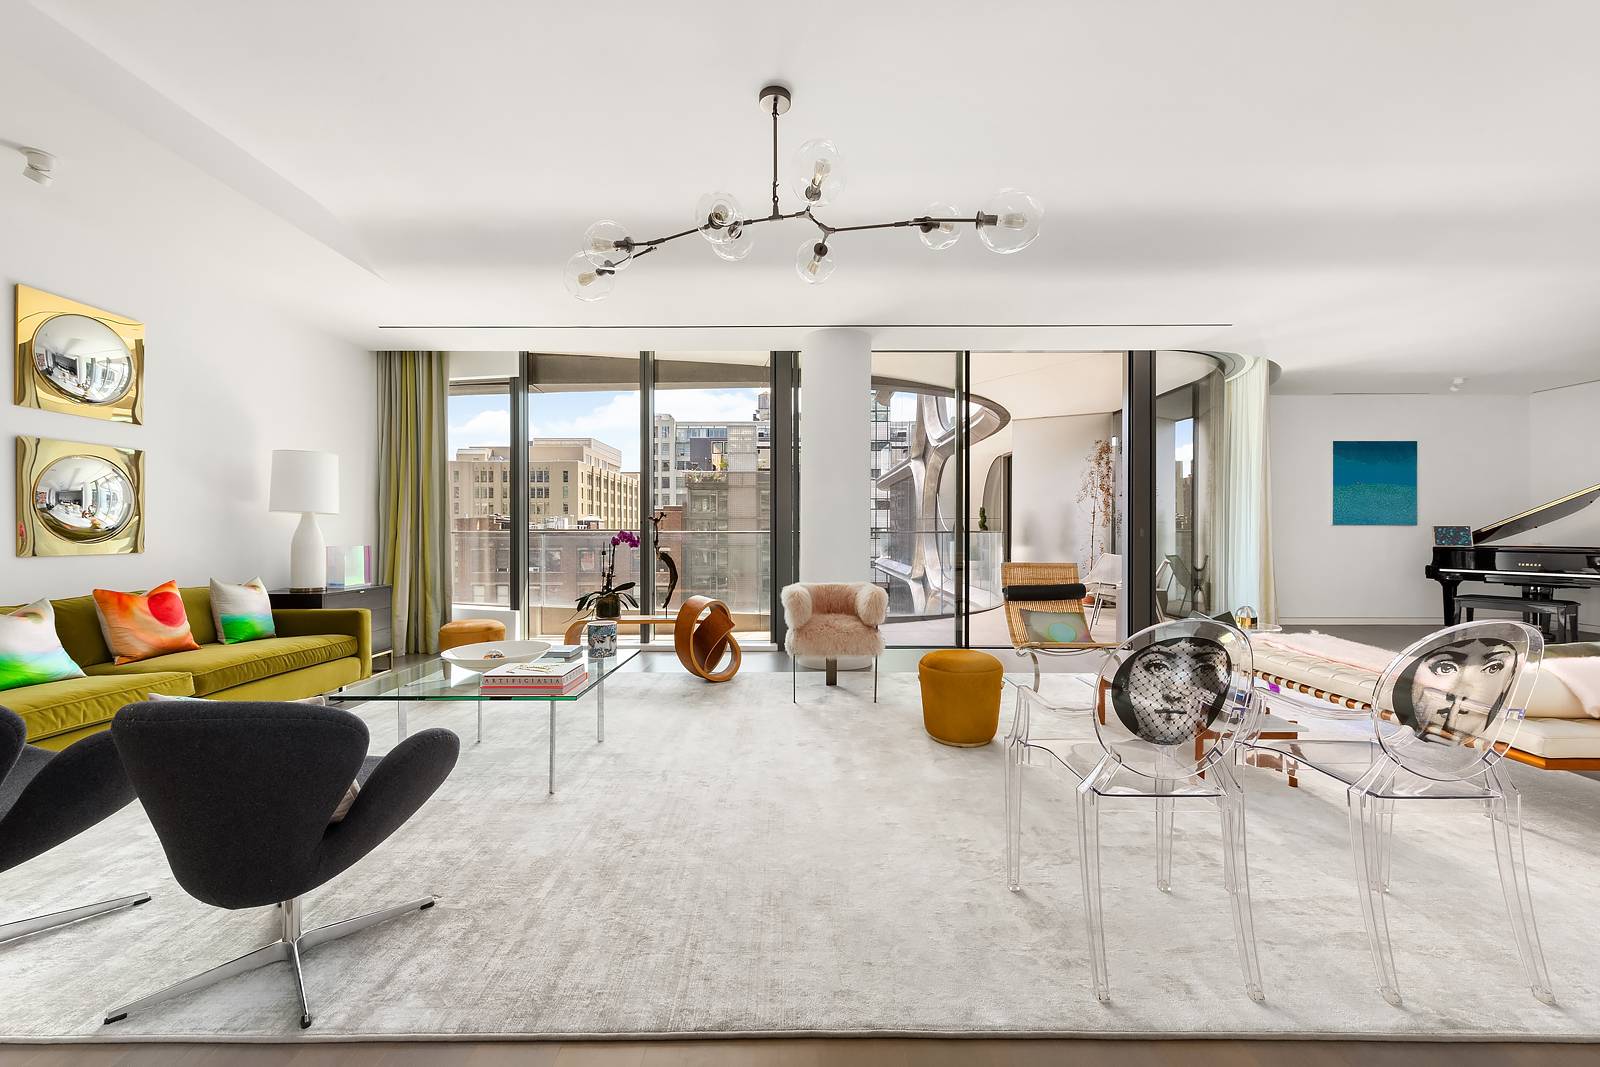 Masterful Zaha Hadid Condo w Balcony, Storage, and Parking Designer finishes and modern elegance abound in this stunning 4 bedroom, 4.